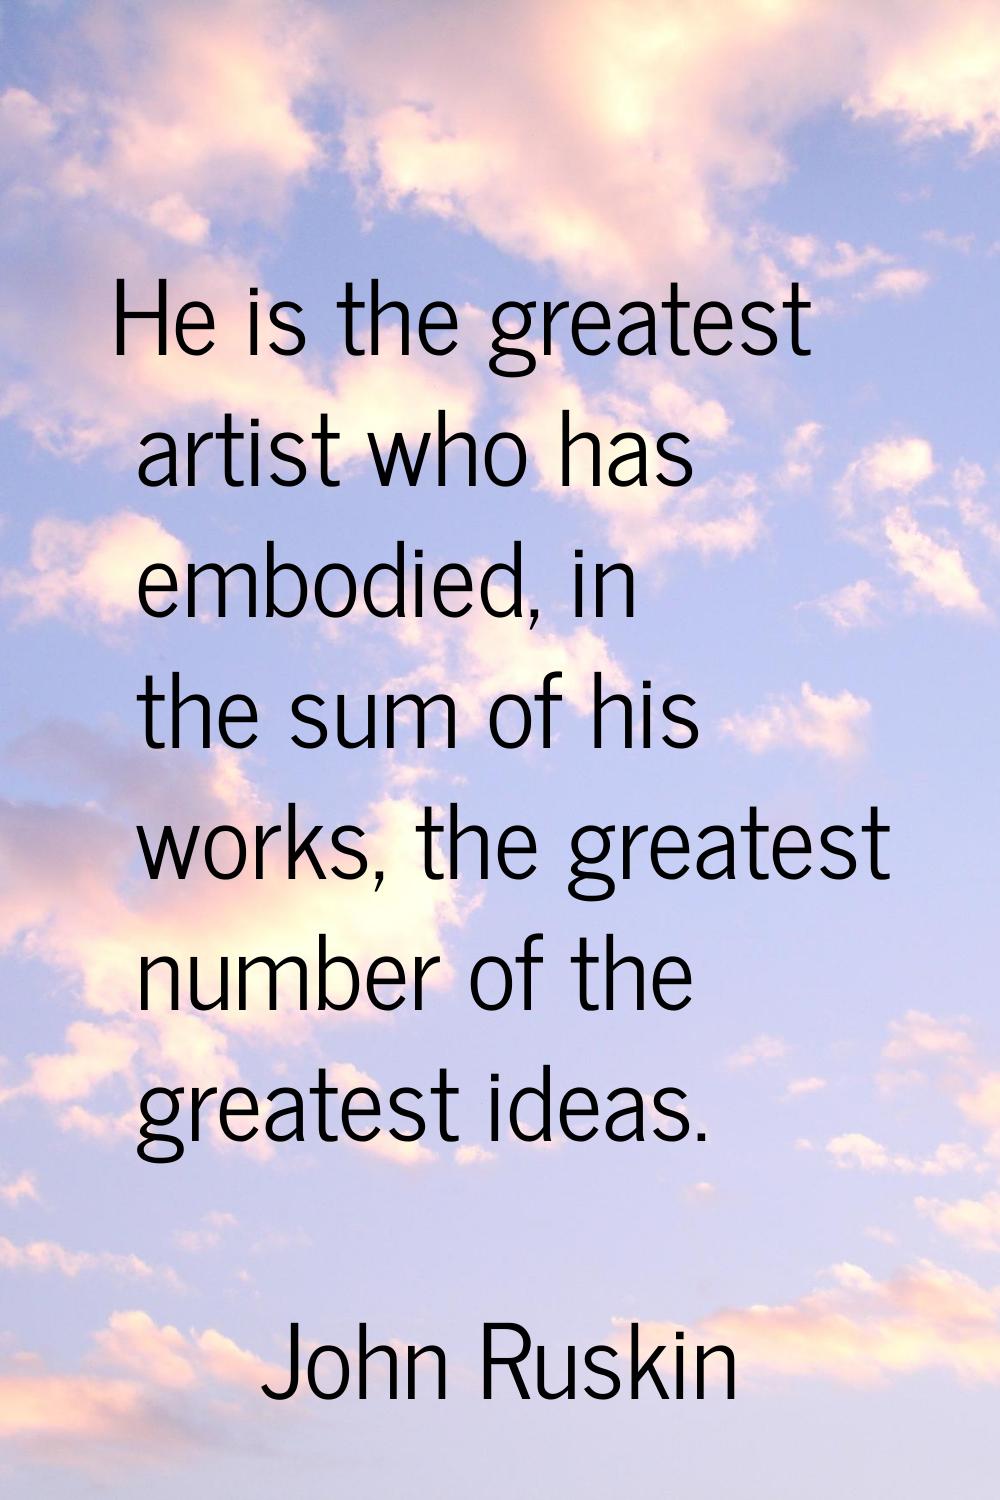 He is the greatest artist who has embodied, in the sum of his works, the greatest number of the gre